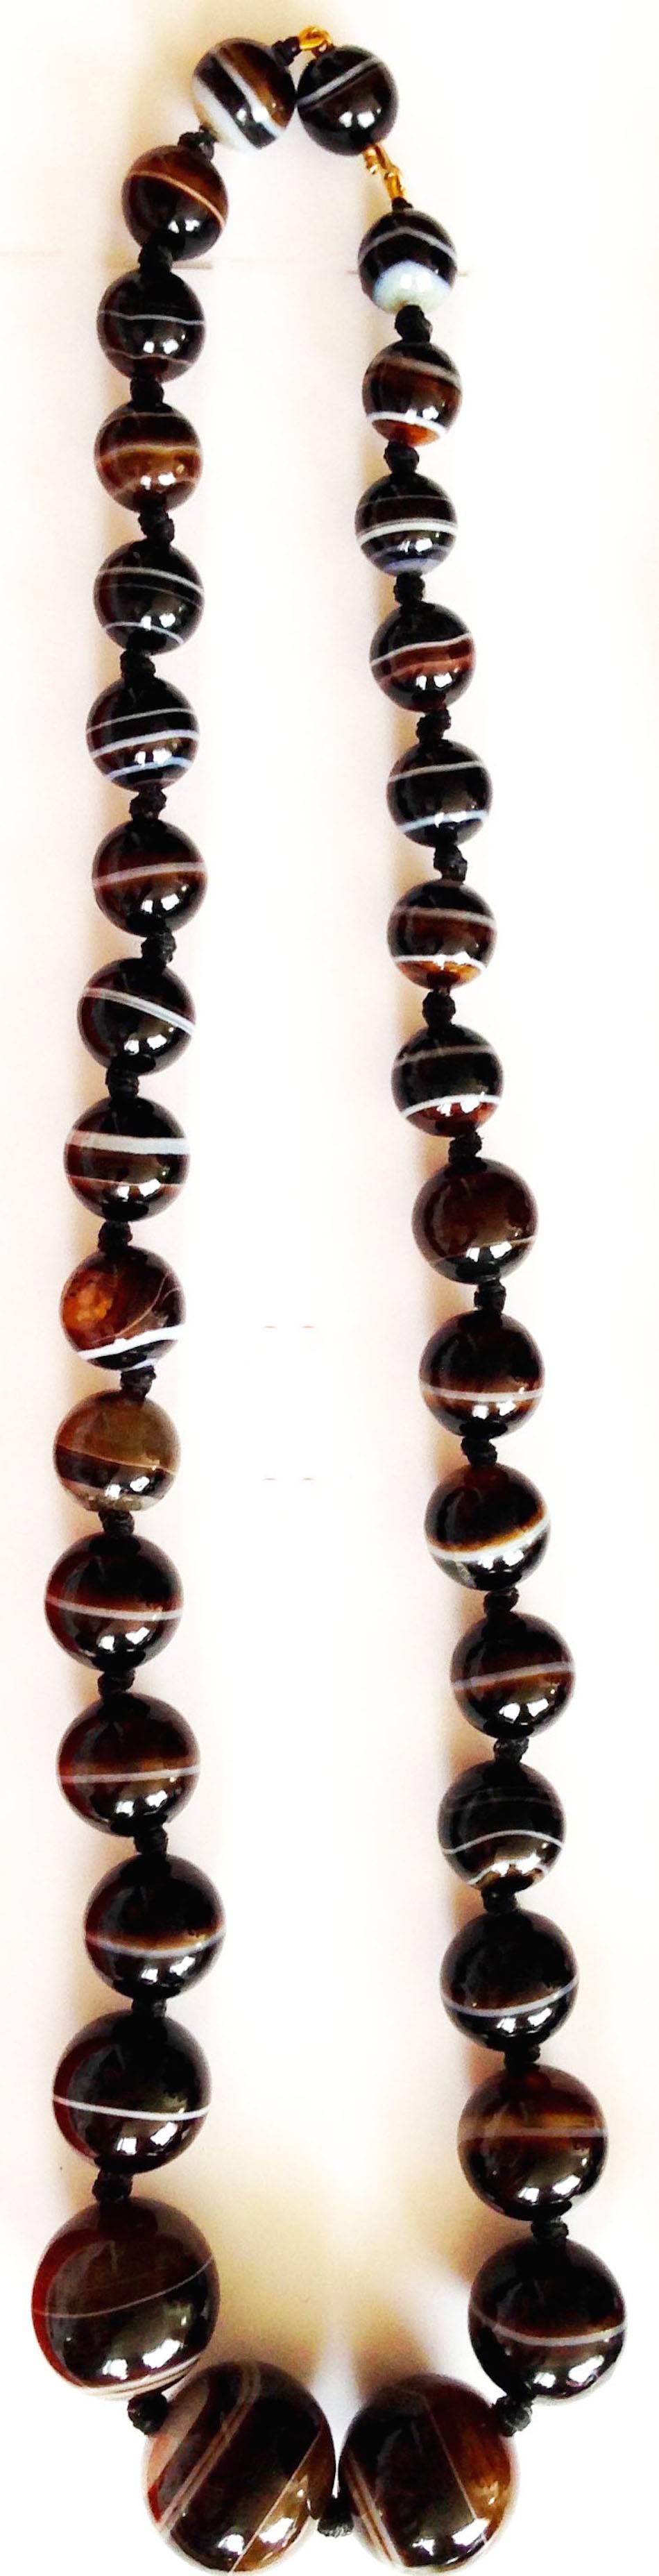 Bold Victorian banded agate bead necklace with three large beads tapering down to smaller ones. There are 34 beads in the necklace which has a bead clasp. Agate beads have become very collectible as many believe they have mystical qualities. The